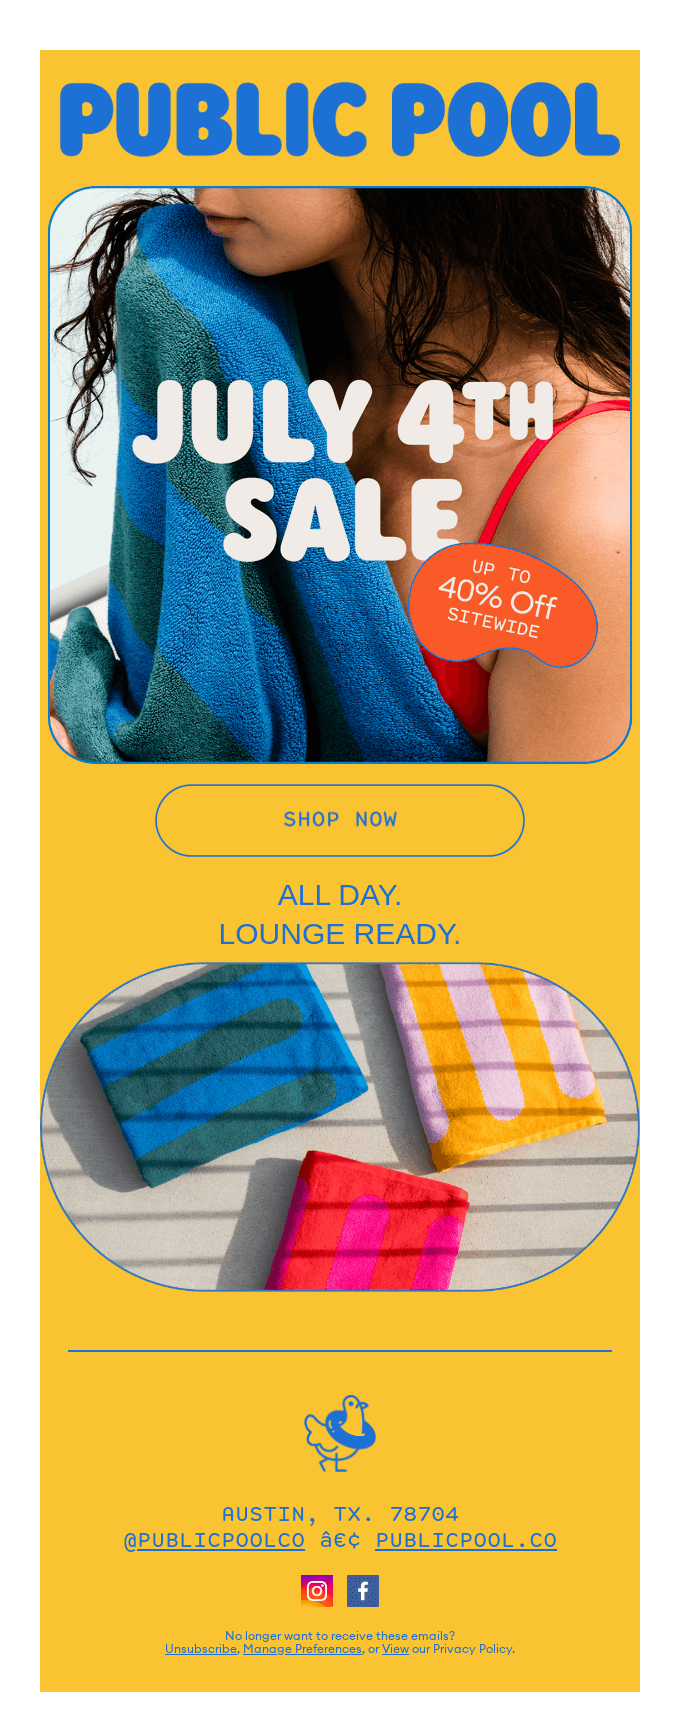 July 4th SALE: up to 40% off towels & apparel sitewide